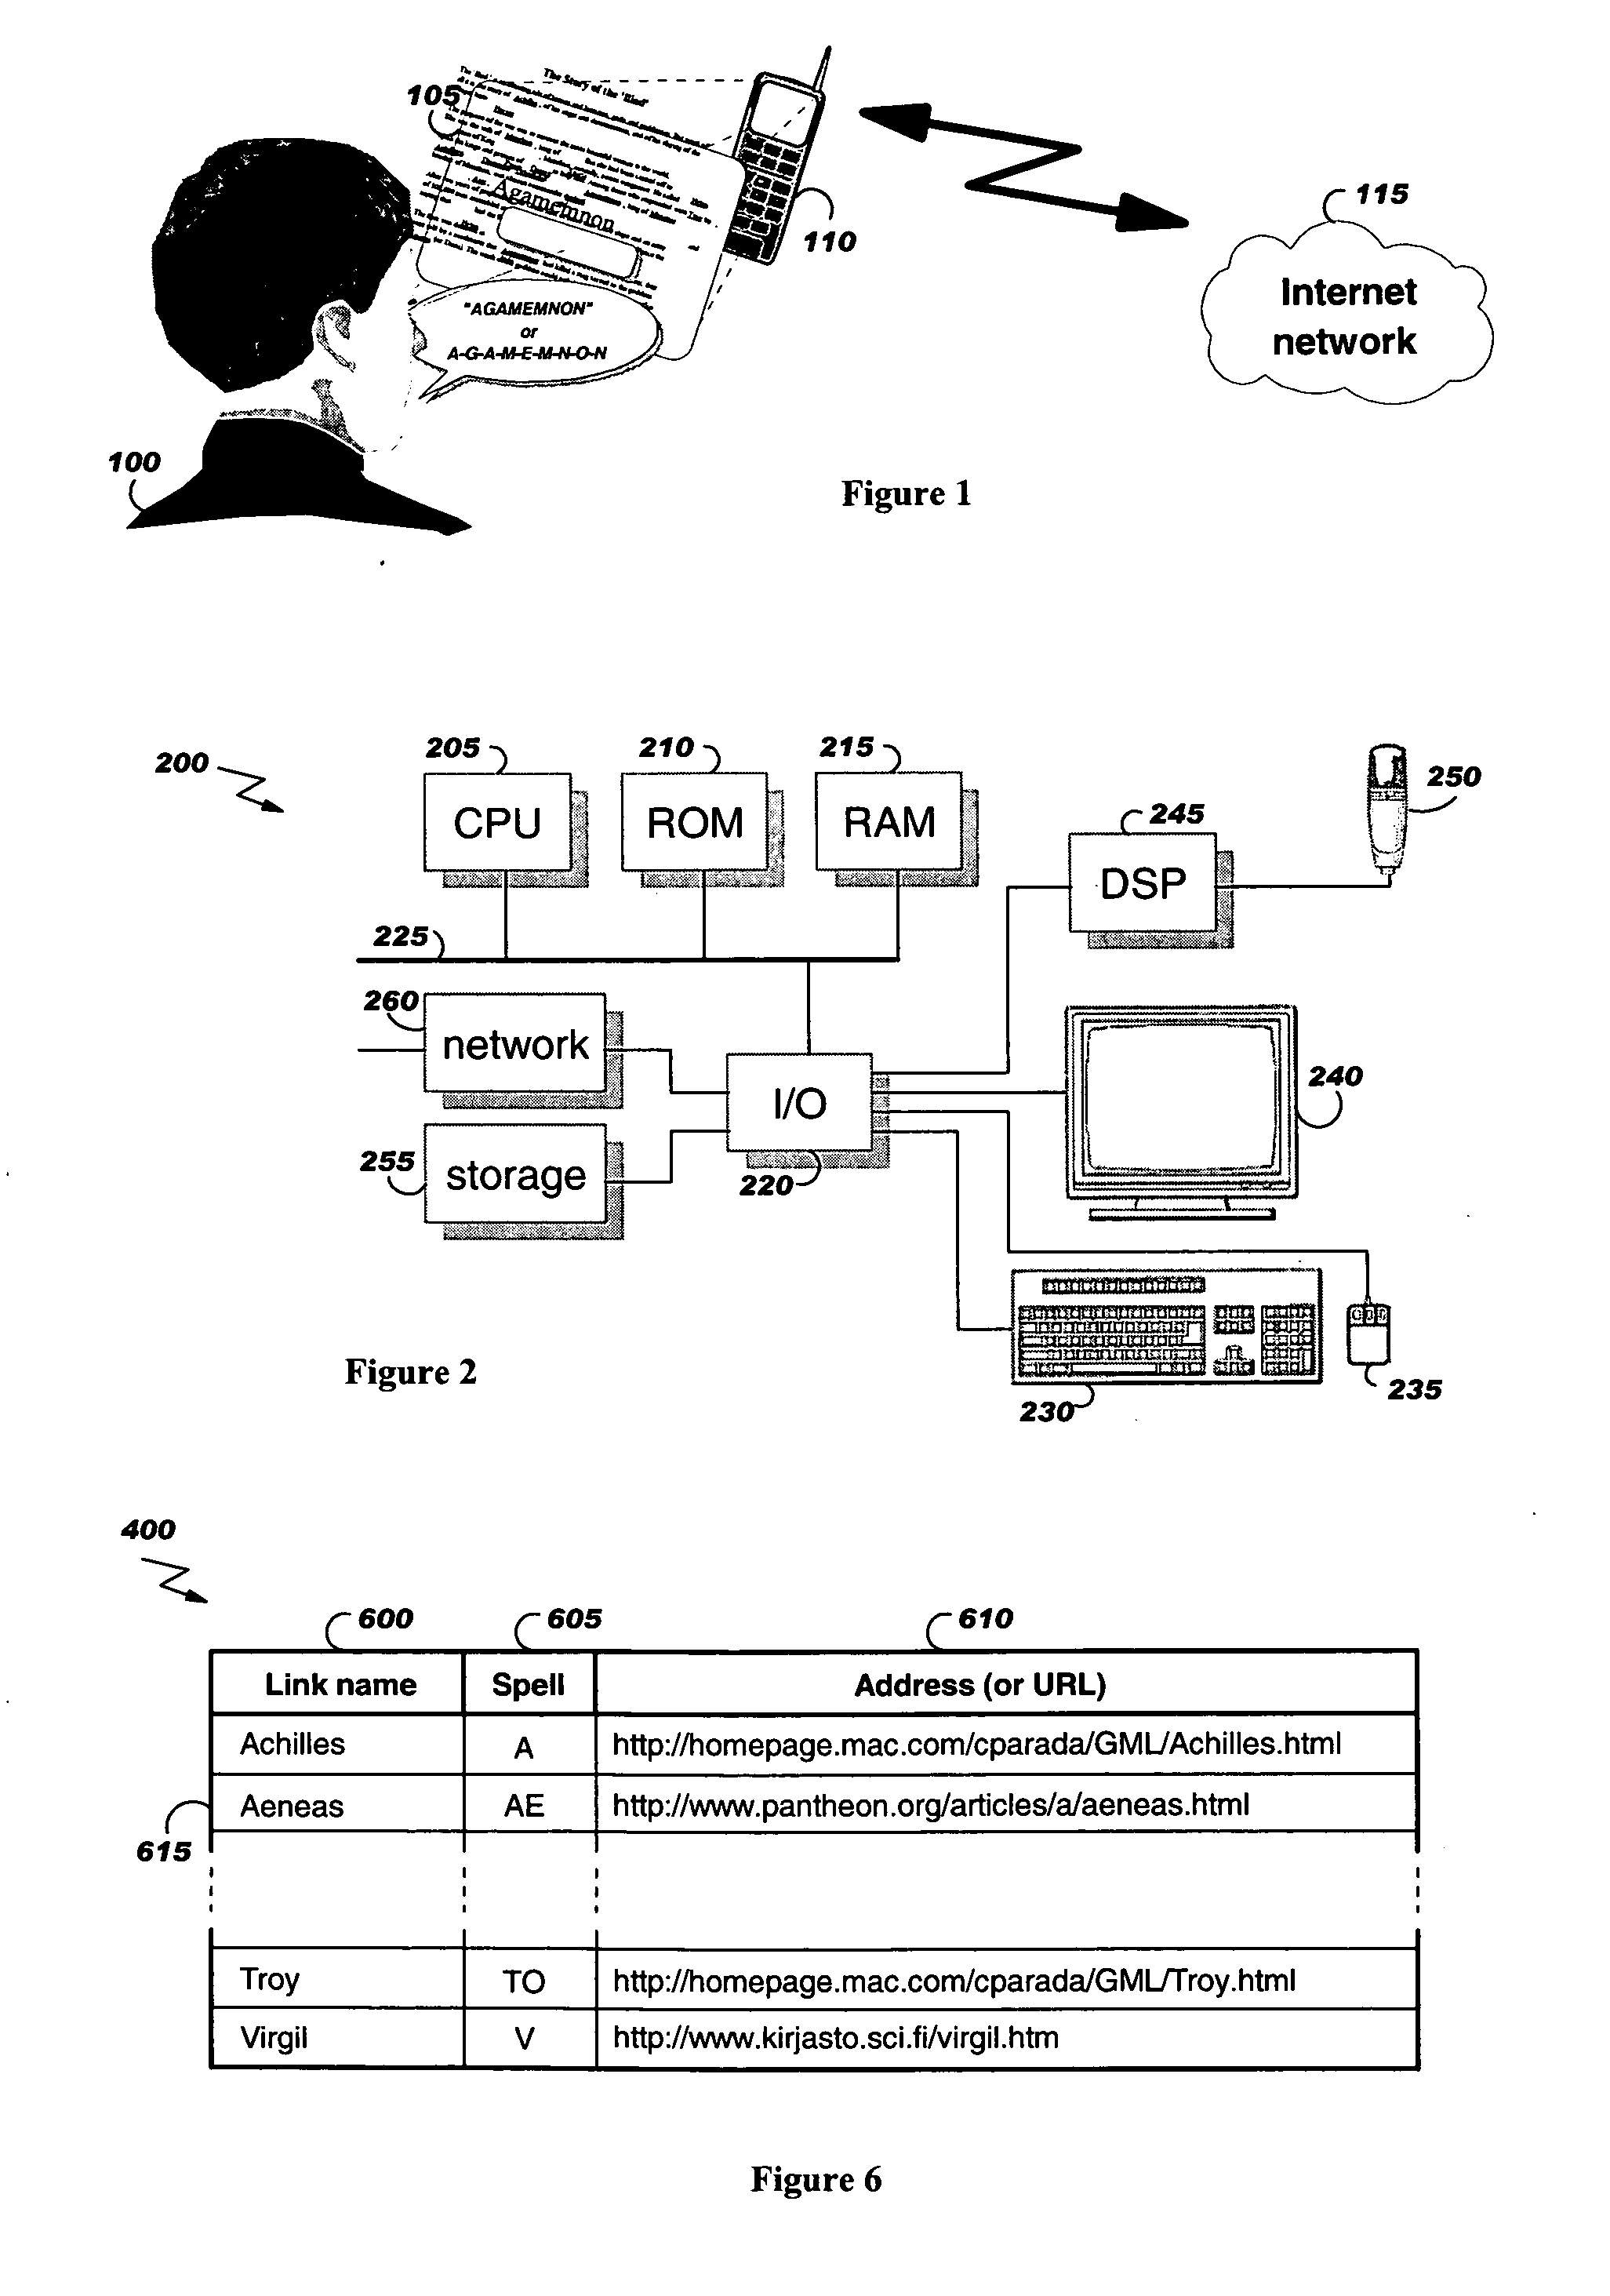 Method and systems for accessing data by spelling discrimination letters of link names